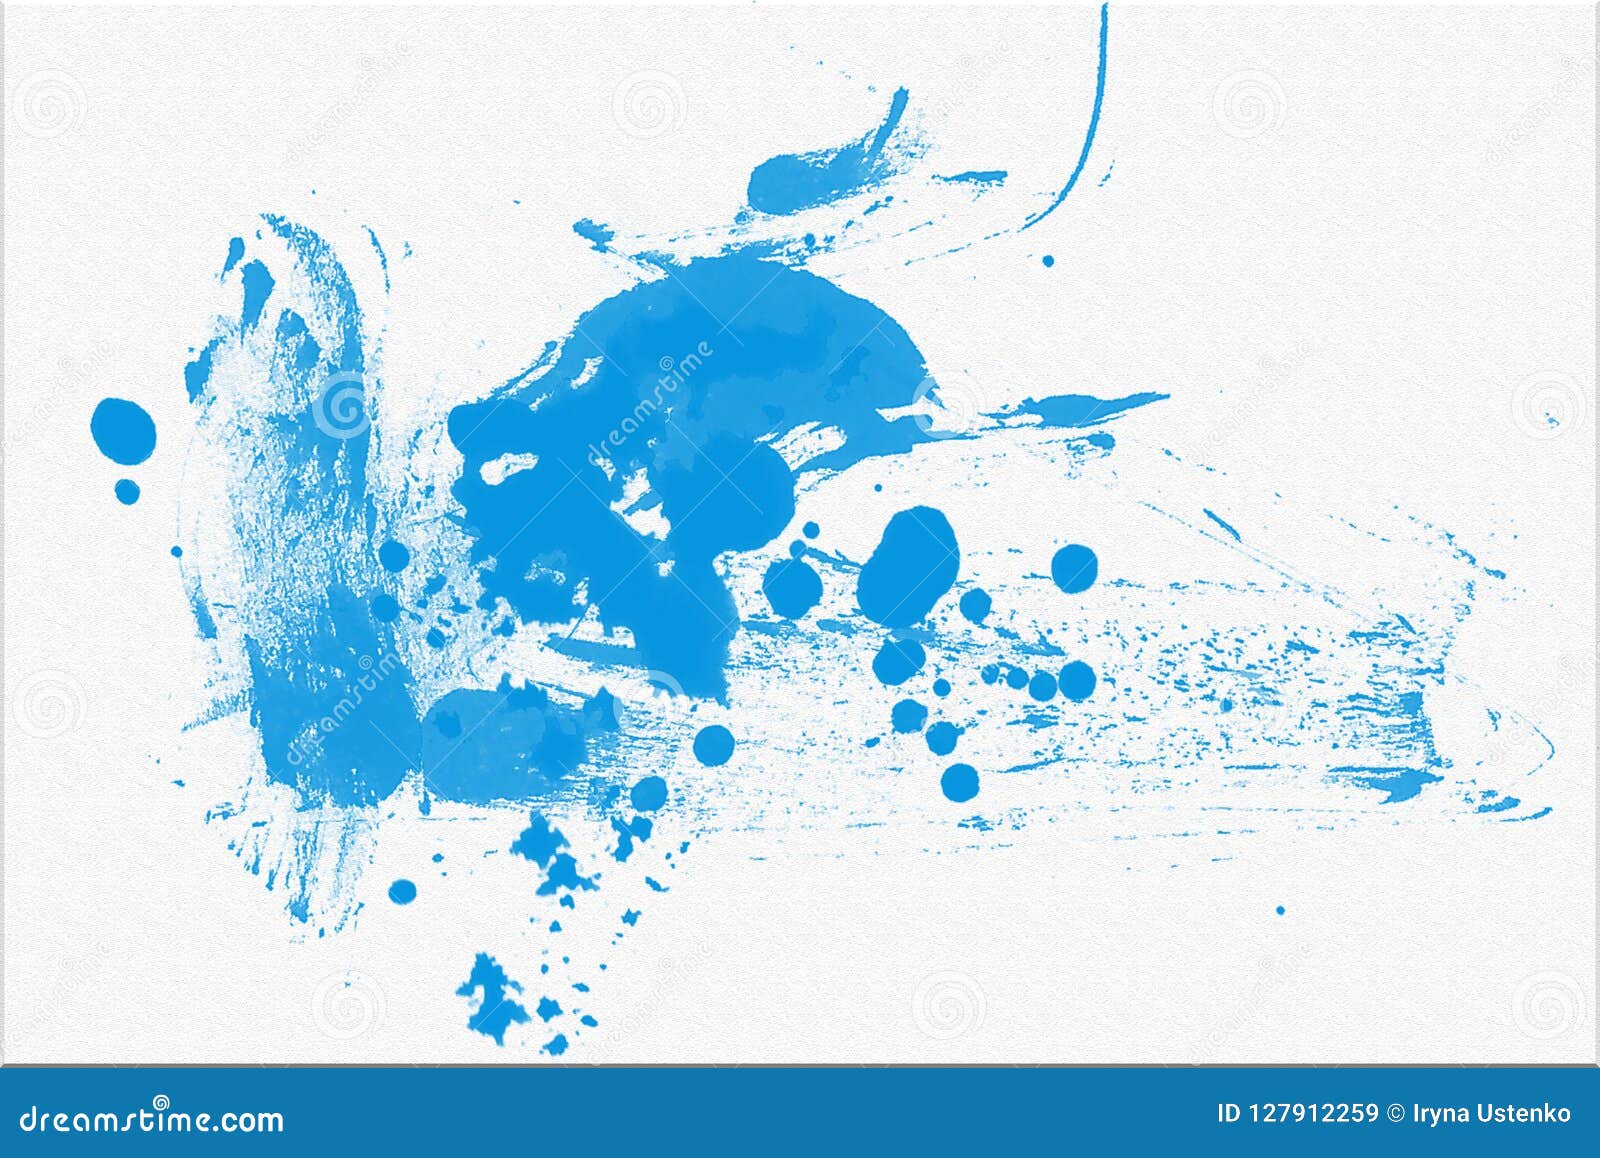 Abstract Blue Hand Draw Watercolor Stain Background Stock Illustration ...